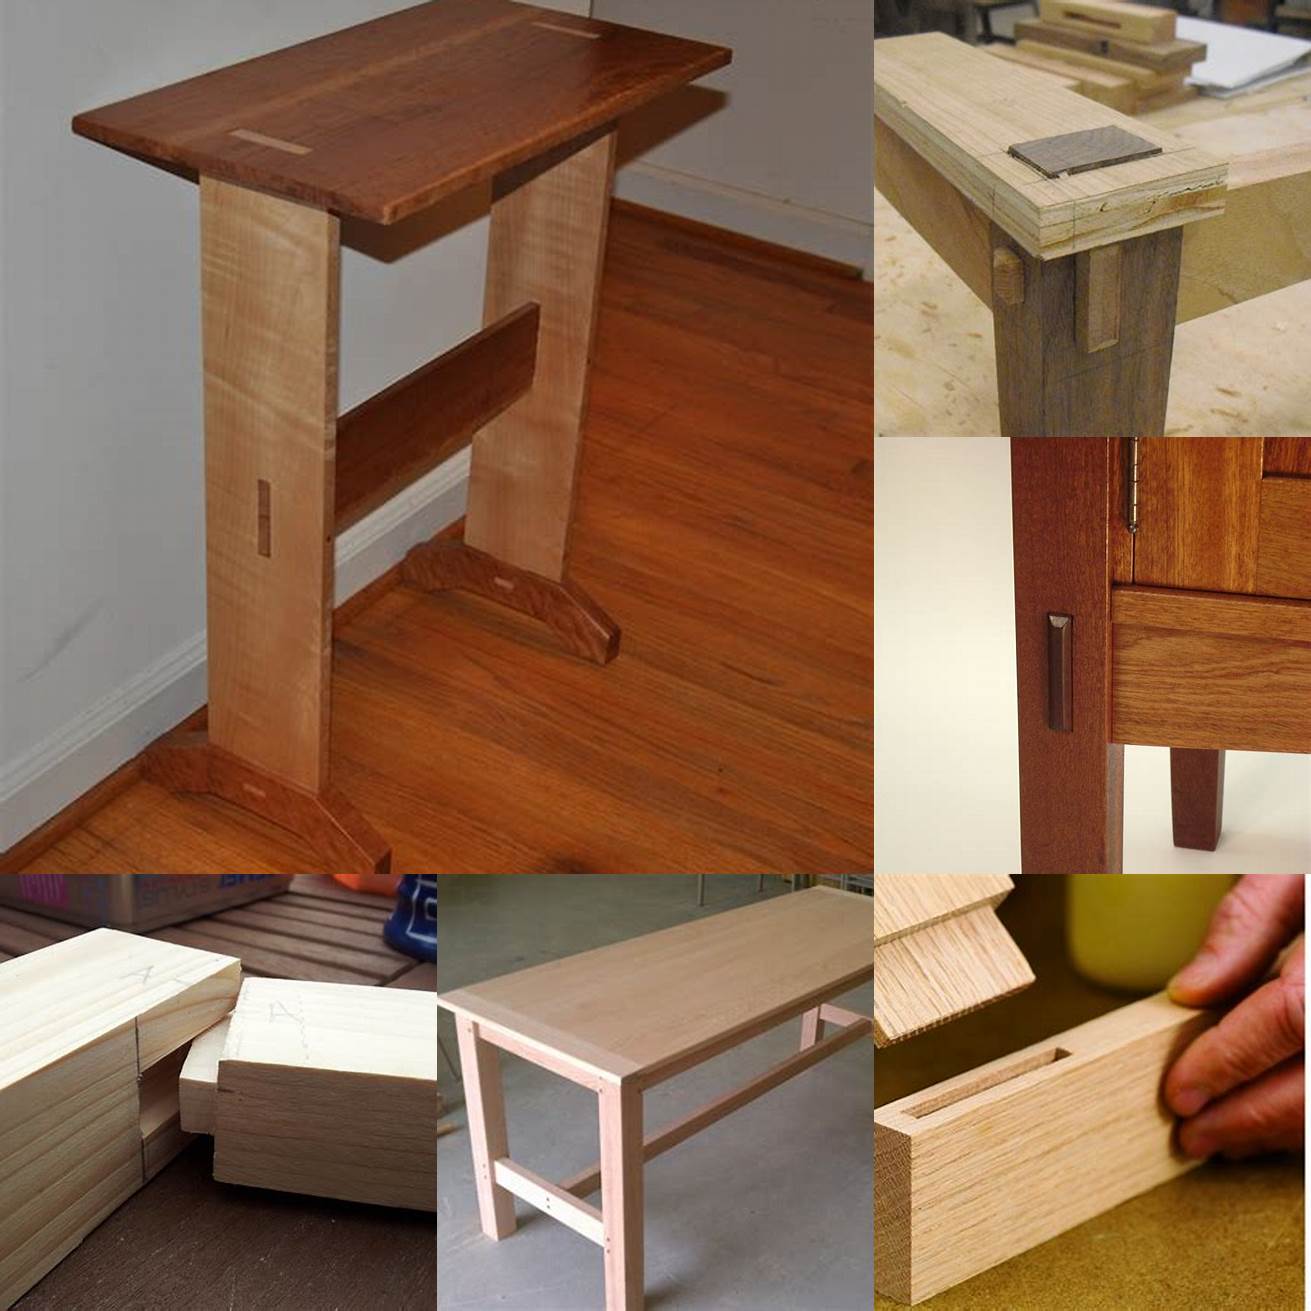 Mortise and Tenon Joinery